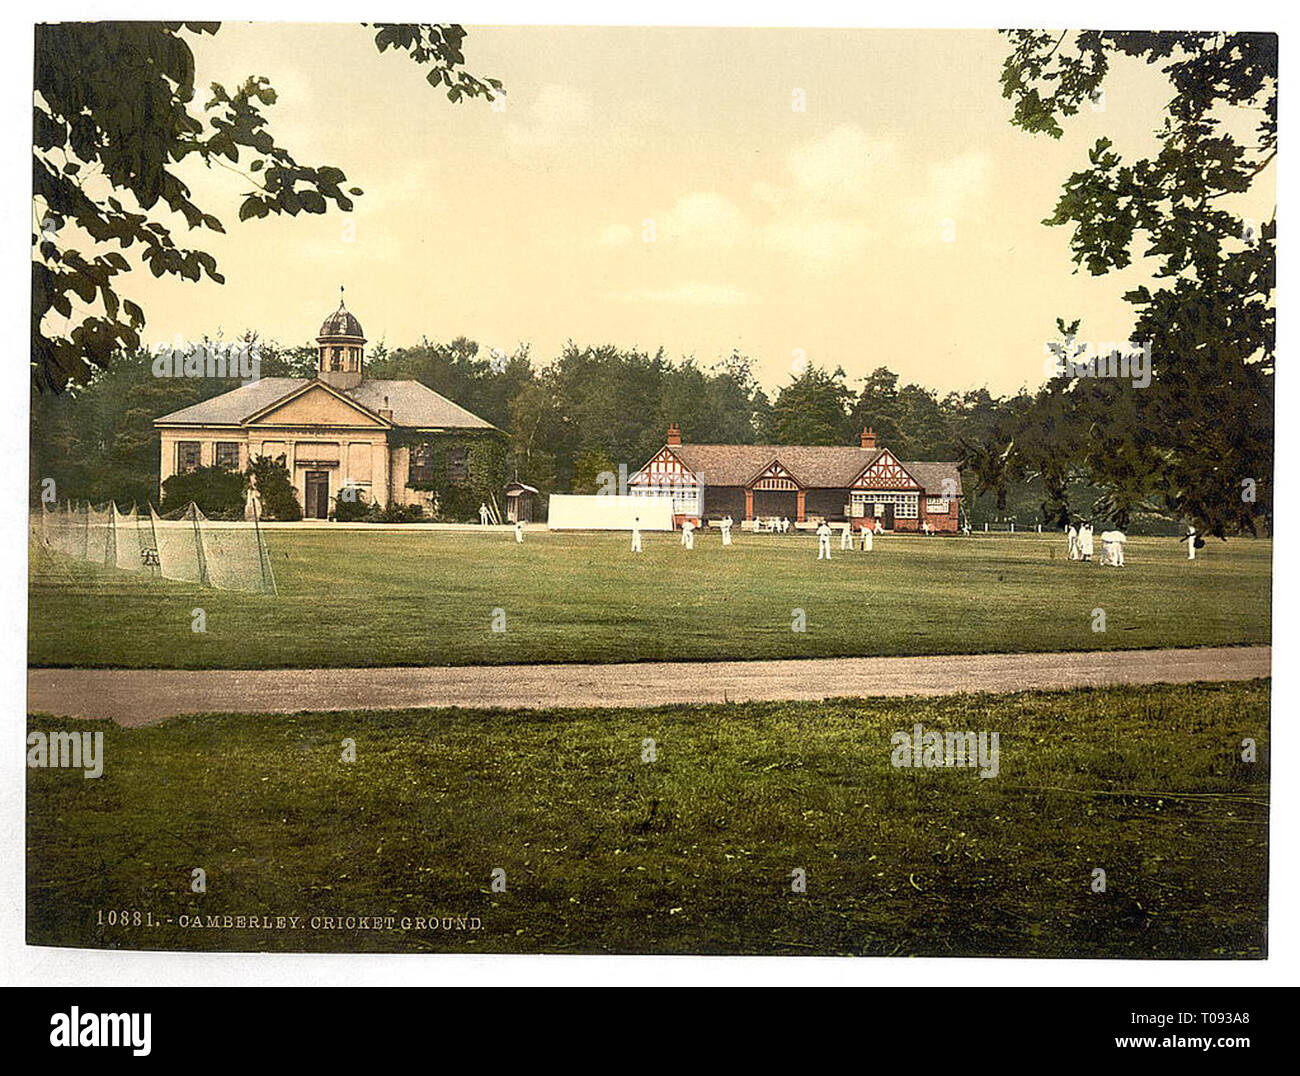 royal military college cricket grounds sandhurst camberley england  loc 8318794820 Stock Photo